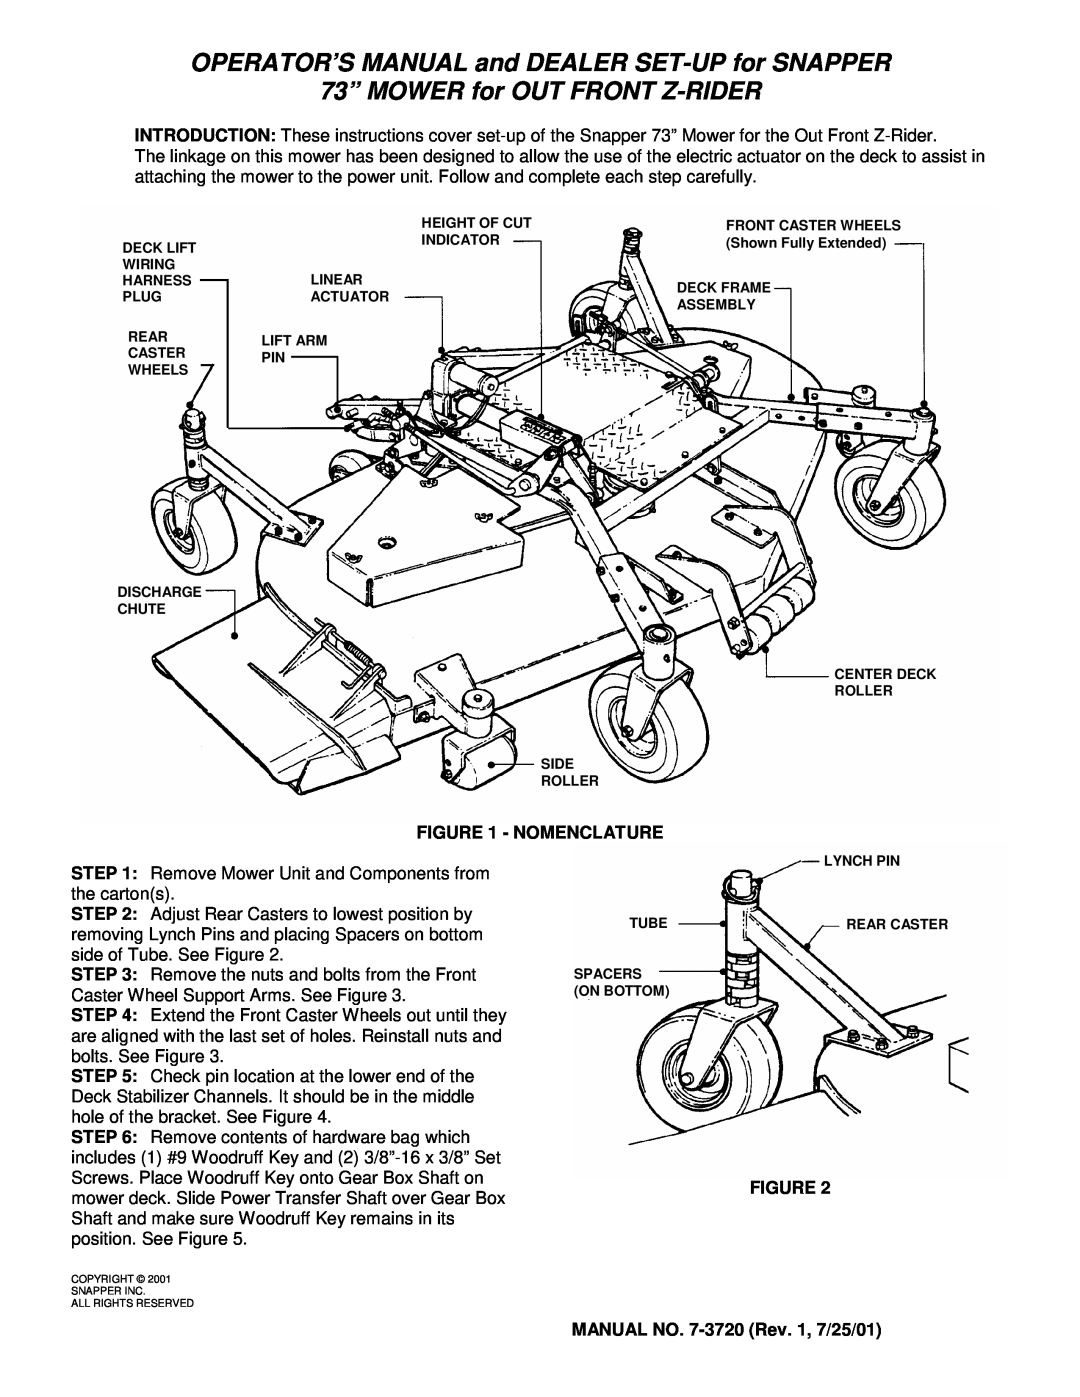 Snapper Out Front Z-rider Mower manual OPERATOR’S MANUAL and DEALER SET-UPfor SNAPPER, 73” MOWER for OUT FRONT Z-RIDER 